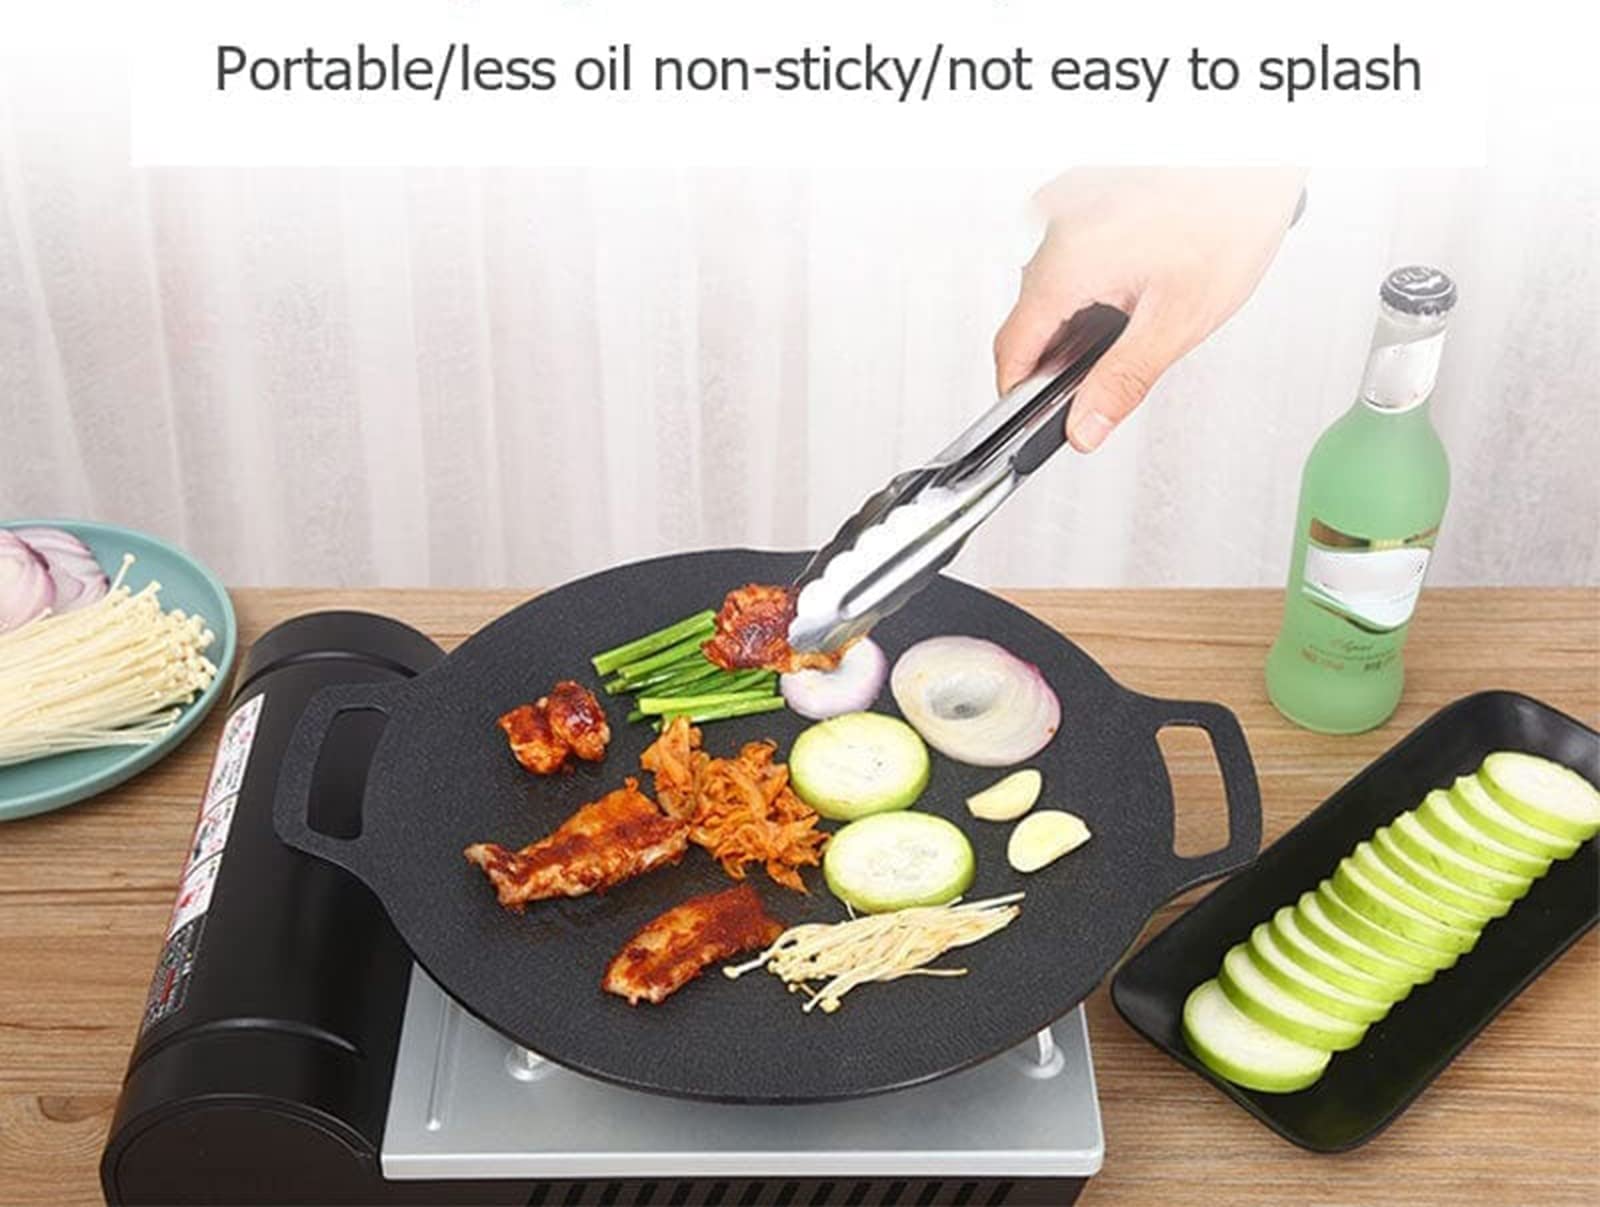 Korean BBQ Grill Pan Non-stick Marble Camping Round Griddle,Korean Non-stick Round Baking Pan,Korean BBQ Grill Pan, Round Barbecue Griddle Pan with Handle for Baking,Grill,BBQ